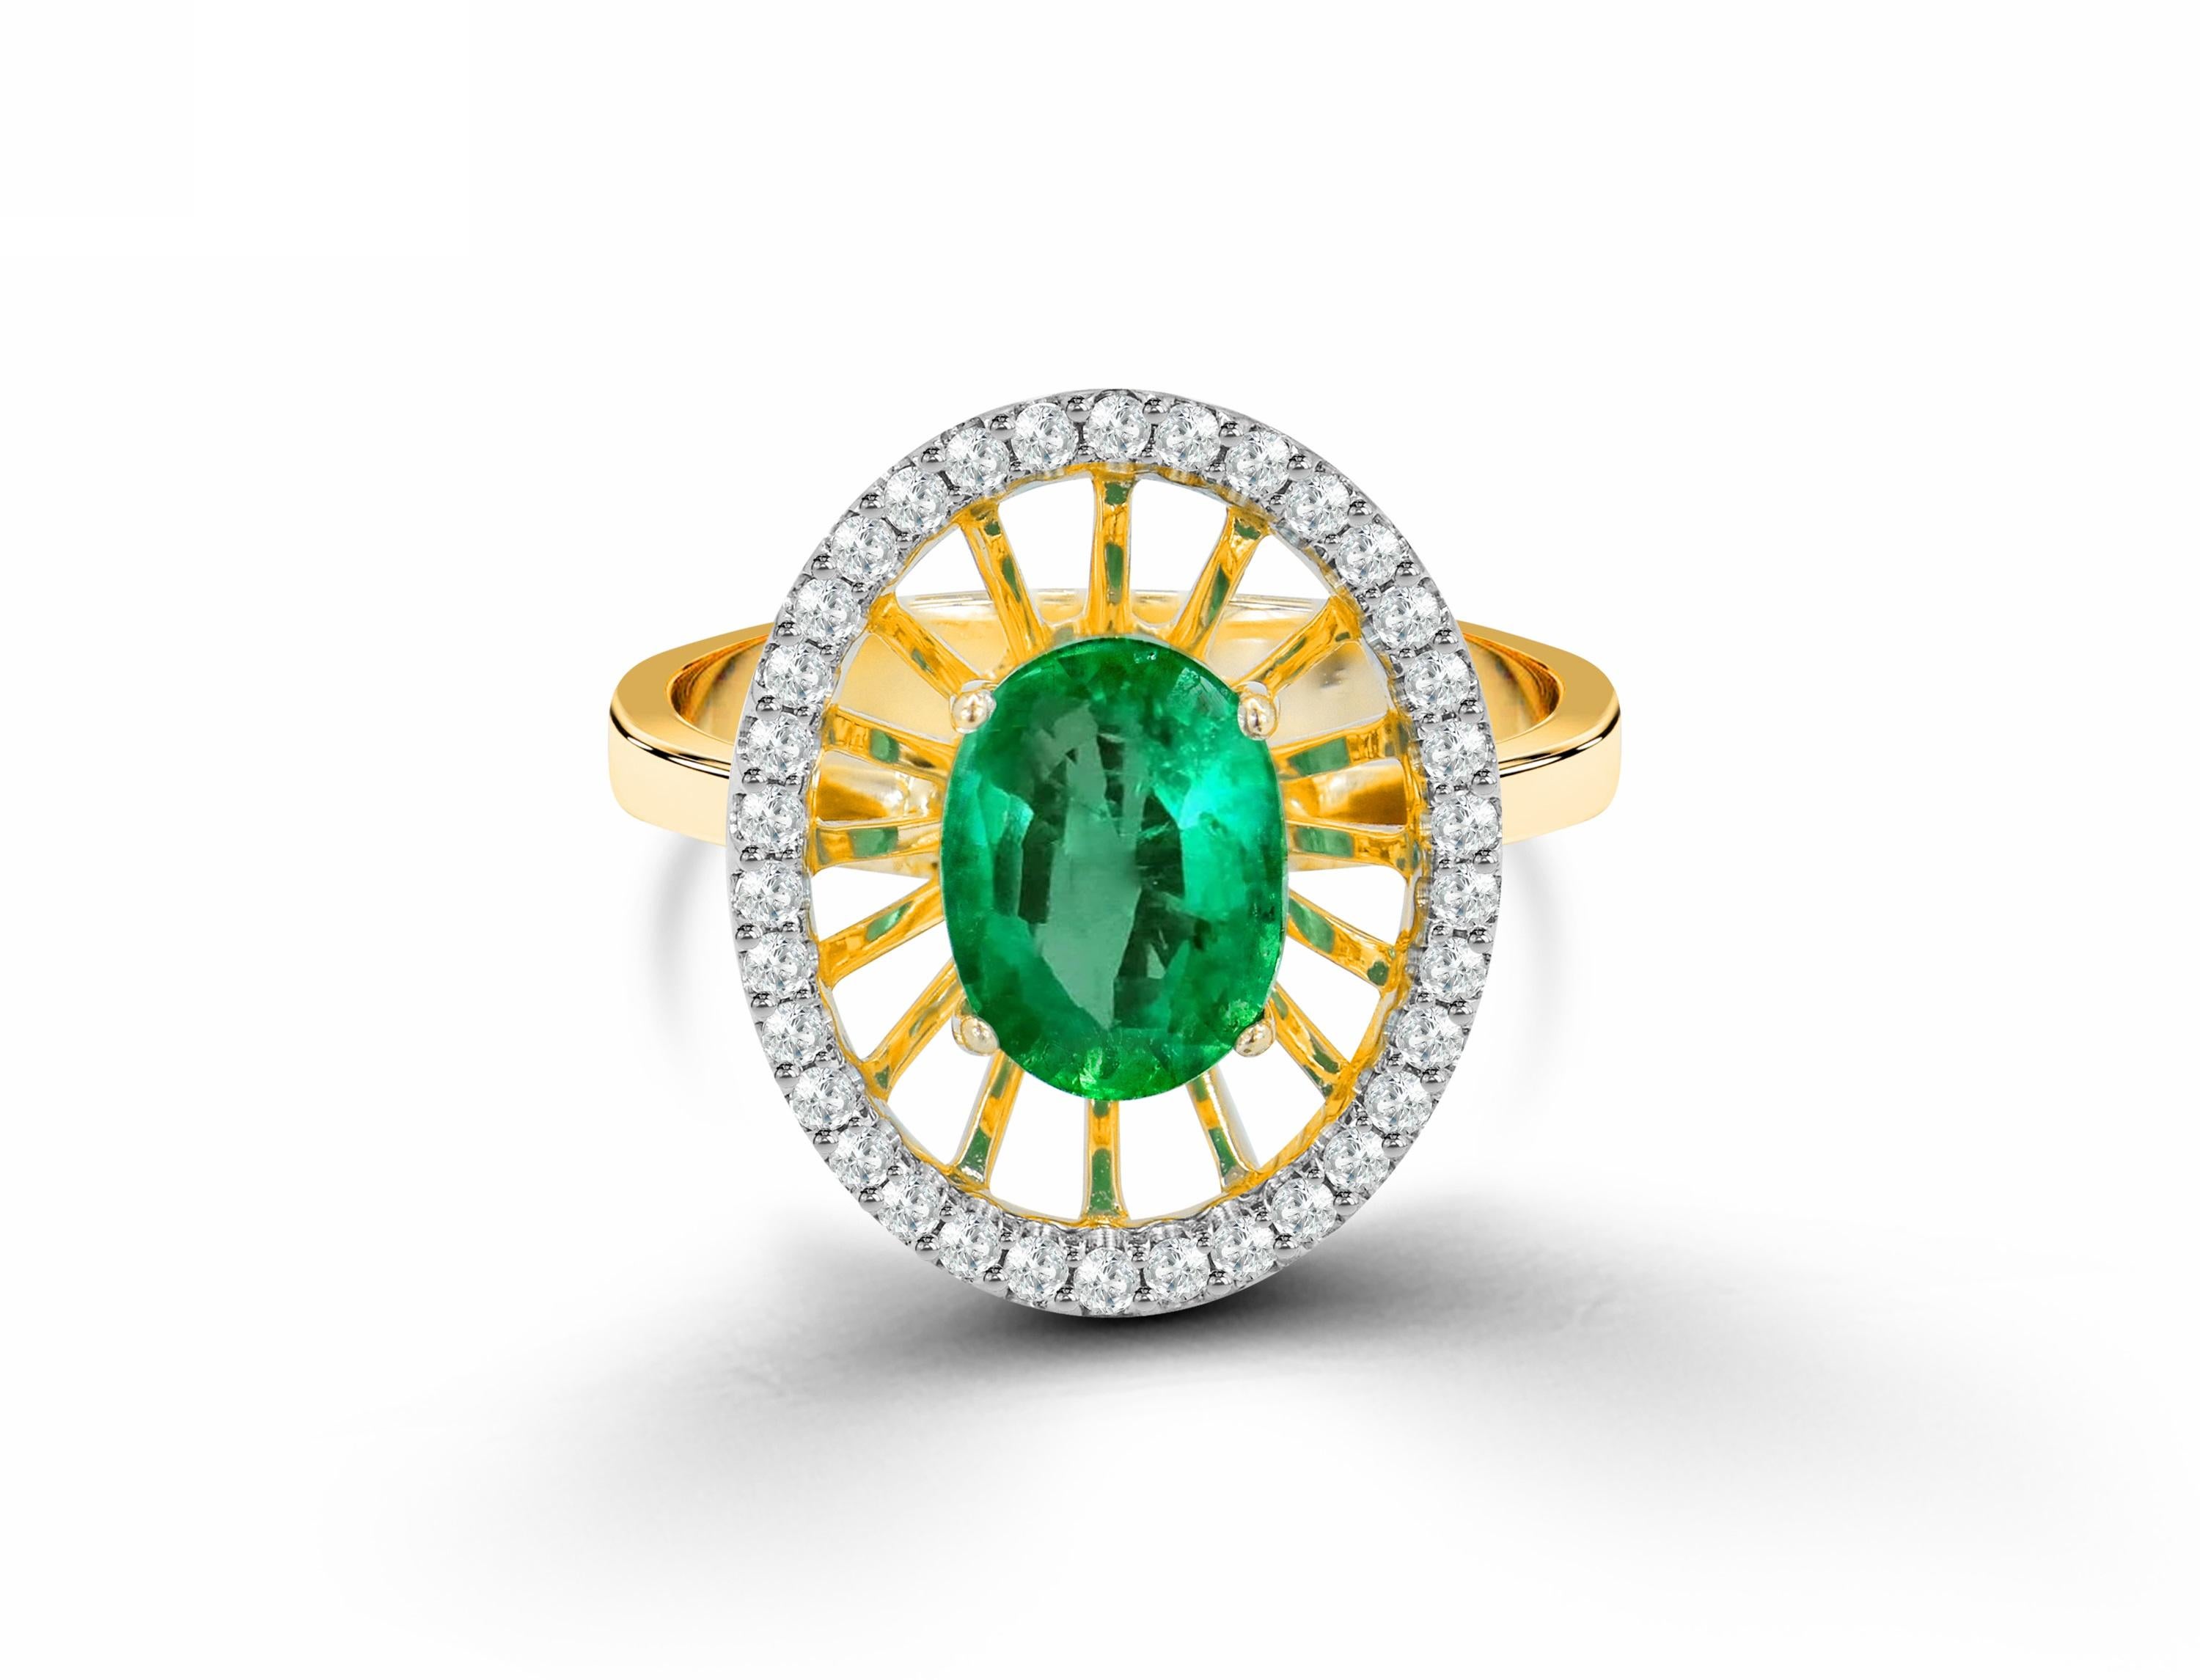 18k Ring Rose Gold Ring Diamond Ring  Emerald  Ring Emerald Oval Ring  Gold Fancy Ring
      This 18K solid white Gold Emerald / Diamond contemporary ring. The fine Quality gold finishing with oval shape Zambian emeralds & scintillating halo set